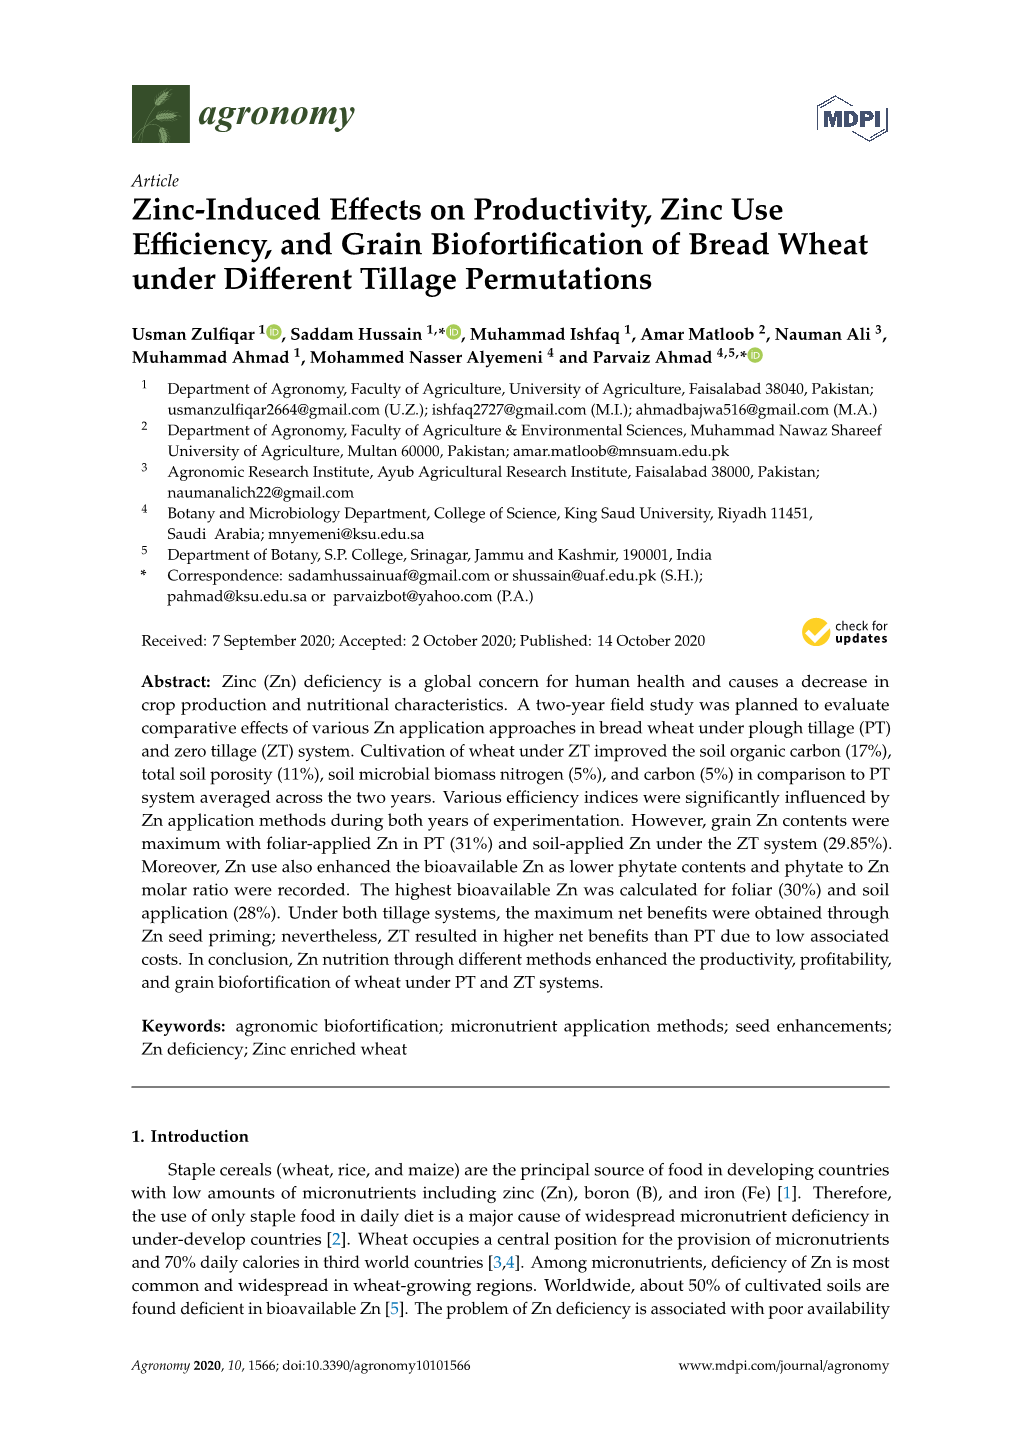 Zinc-Induced Effects on Productivity, Zinc Use Efficiency, and Grain